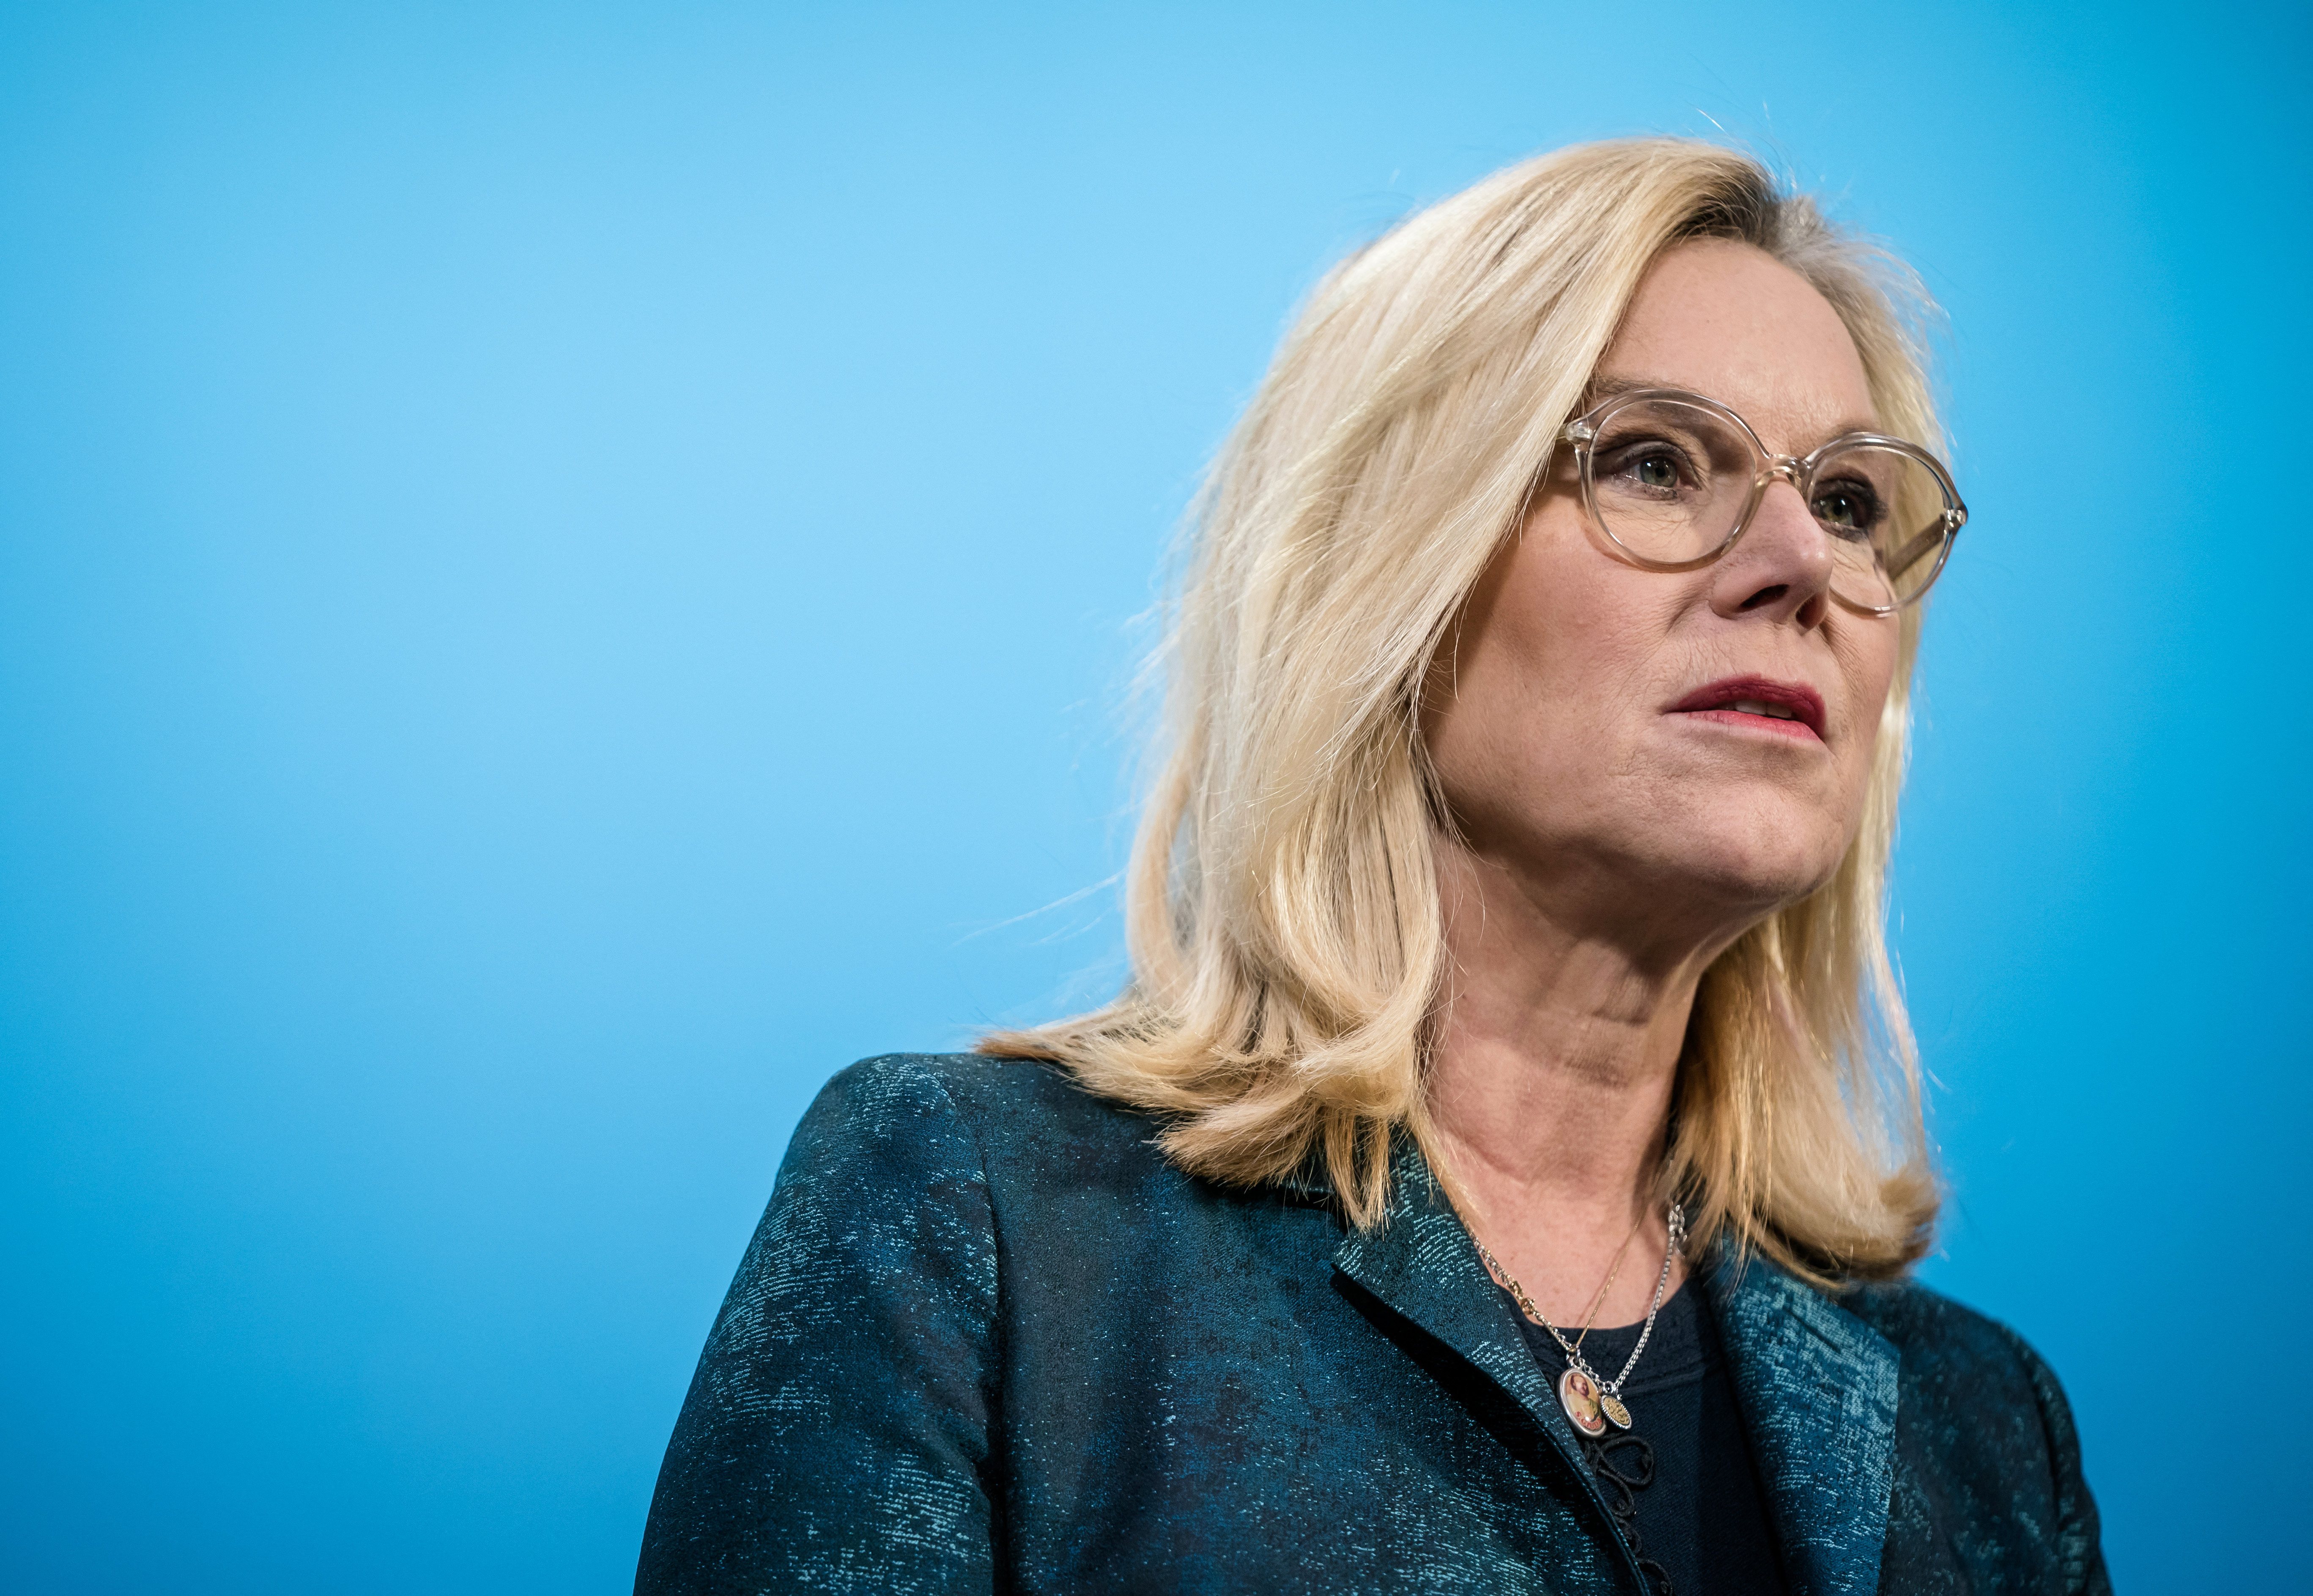 Netherlands Deputy Prime Minister Sigrid Kaag addresses a press conference in The Hague, Netherlands, on February 17.